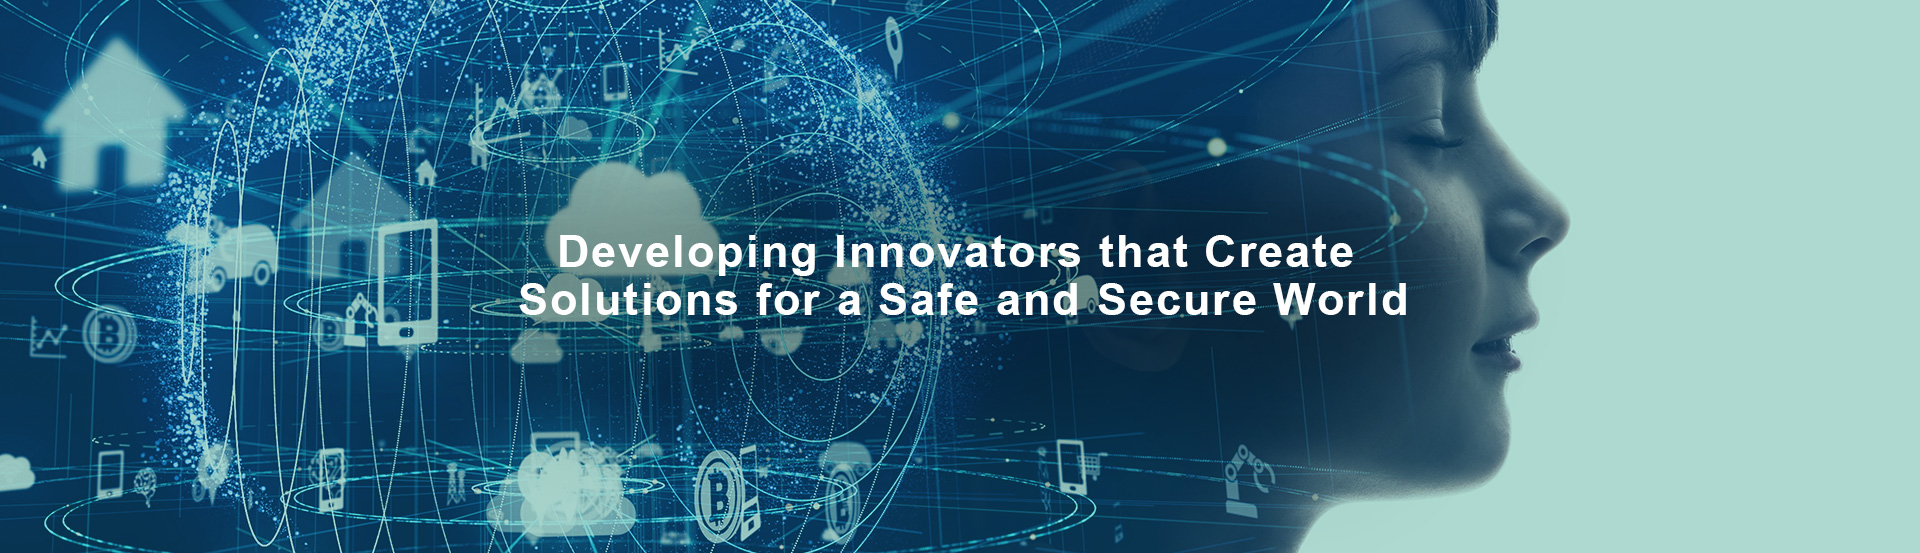 Developing Innovators that Create Solutions for a Safe and Secure World